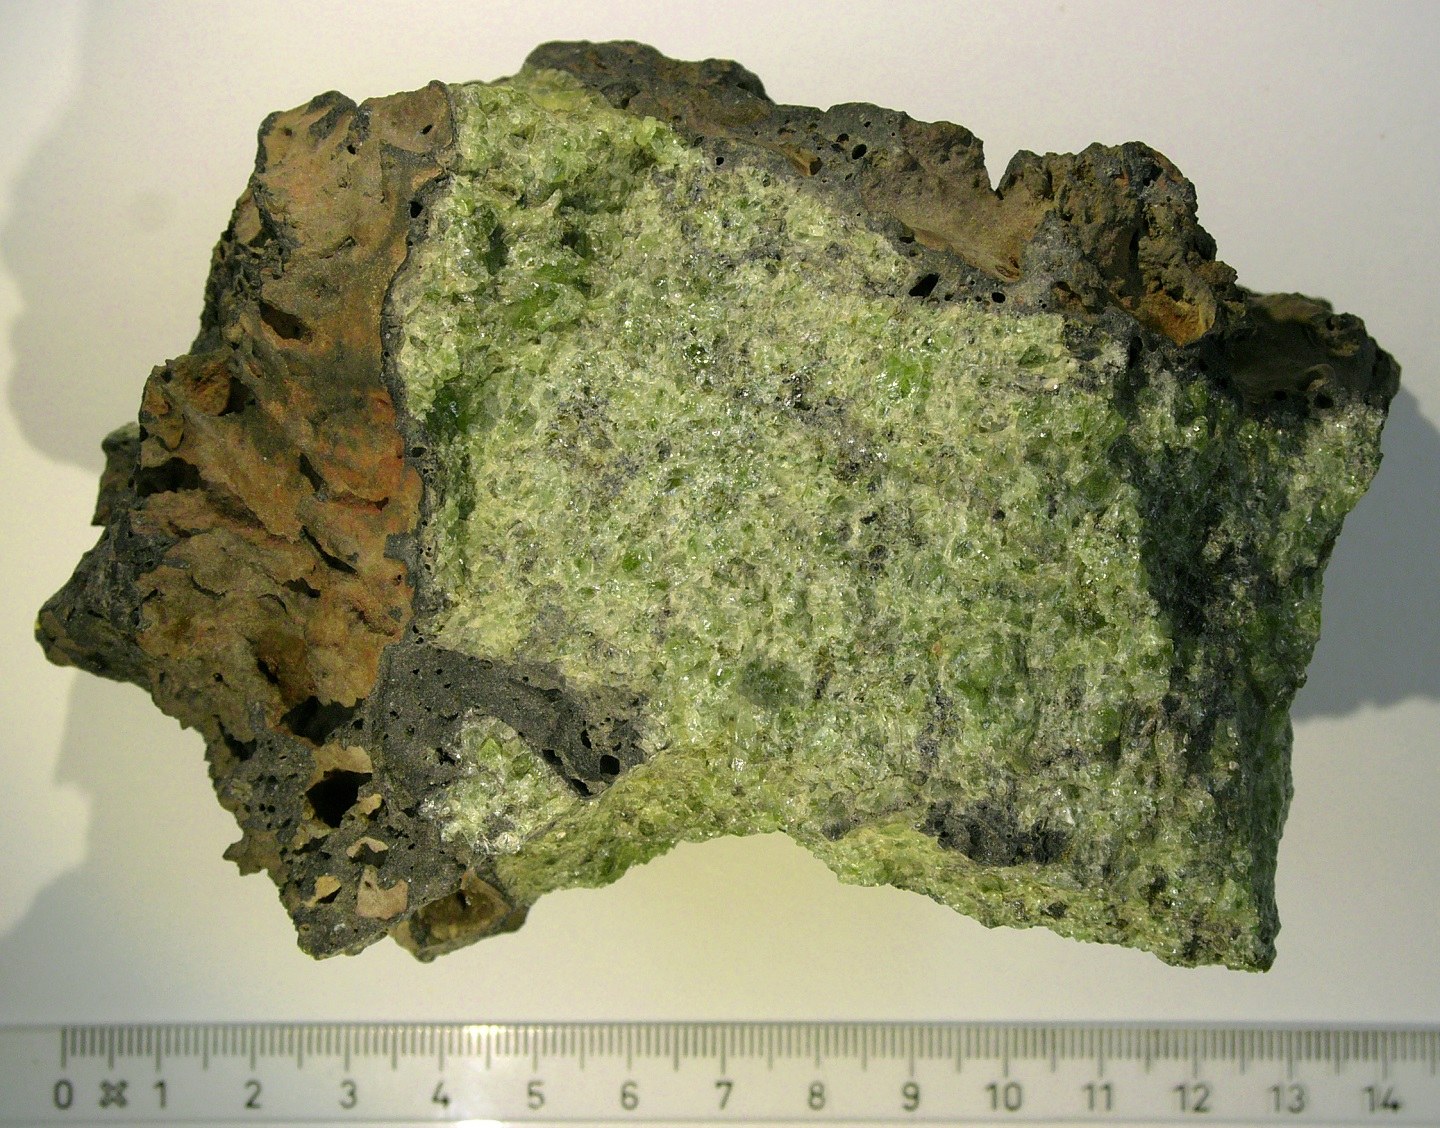 The mineral olivine